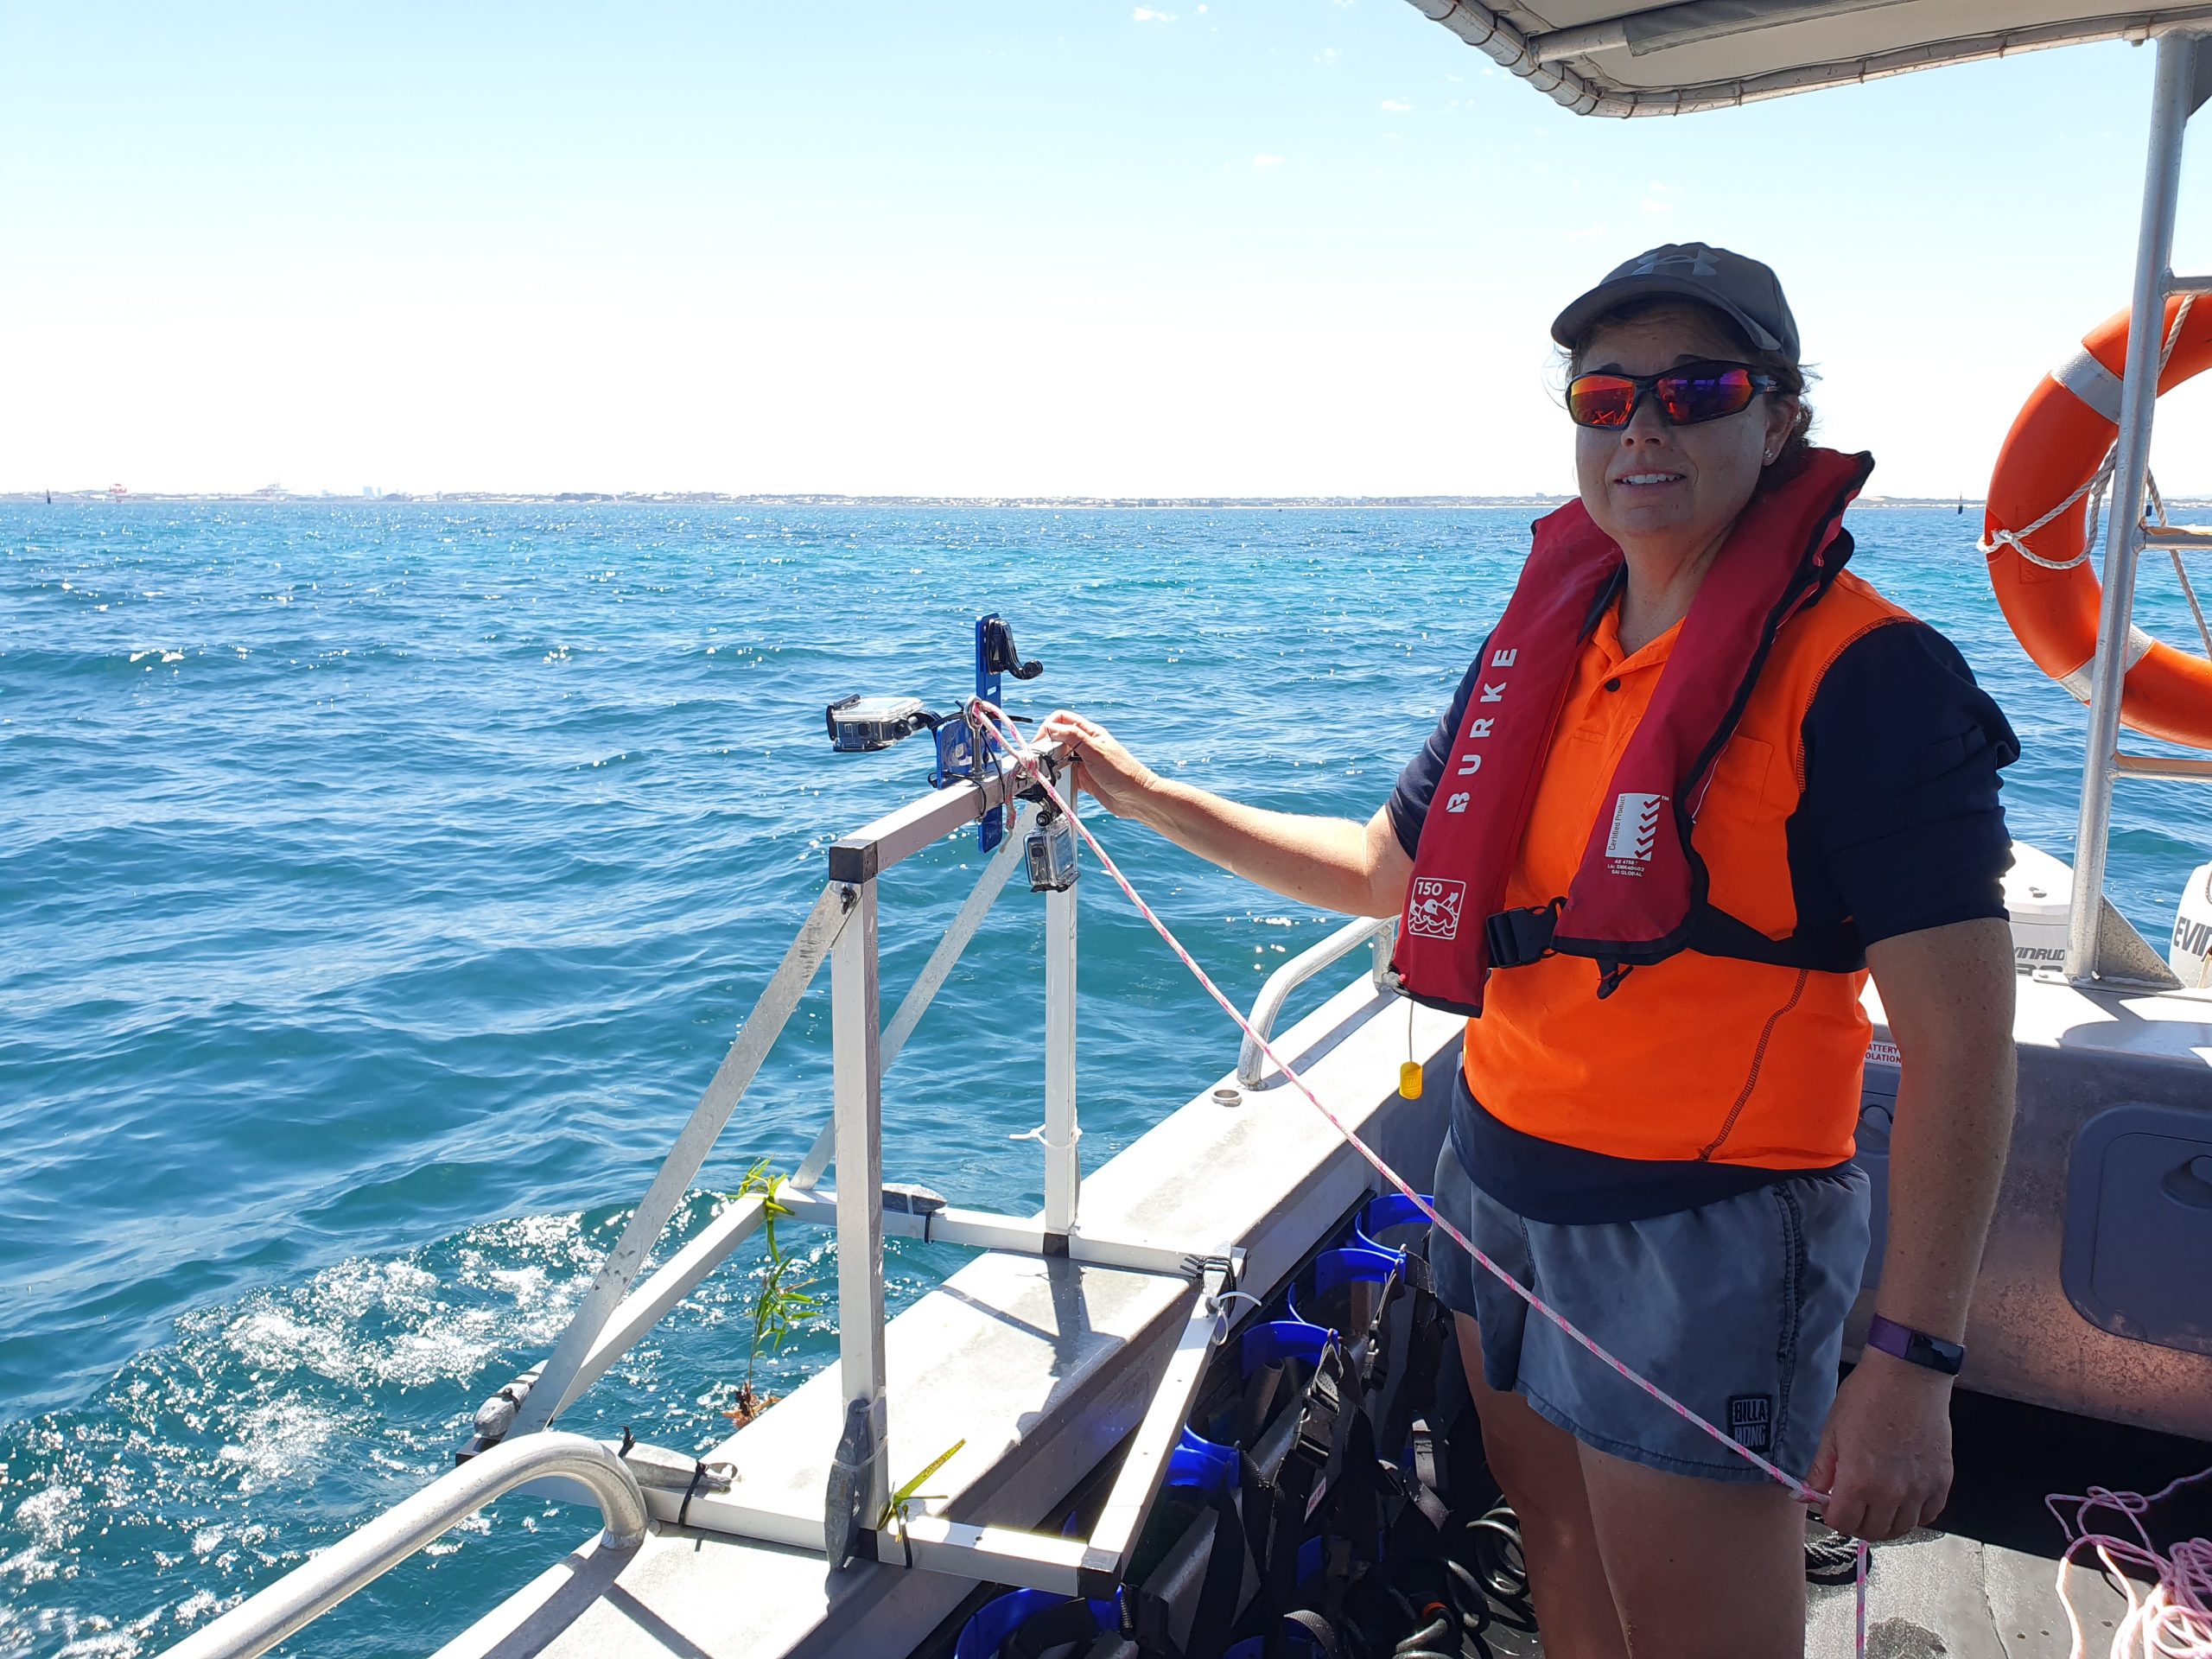 Adult female, Renae Hovey, wearing a life safety vest and deploying smart cameras in the ocean